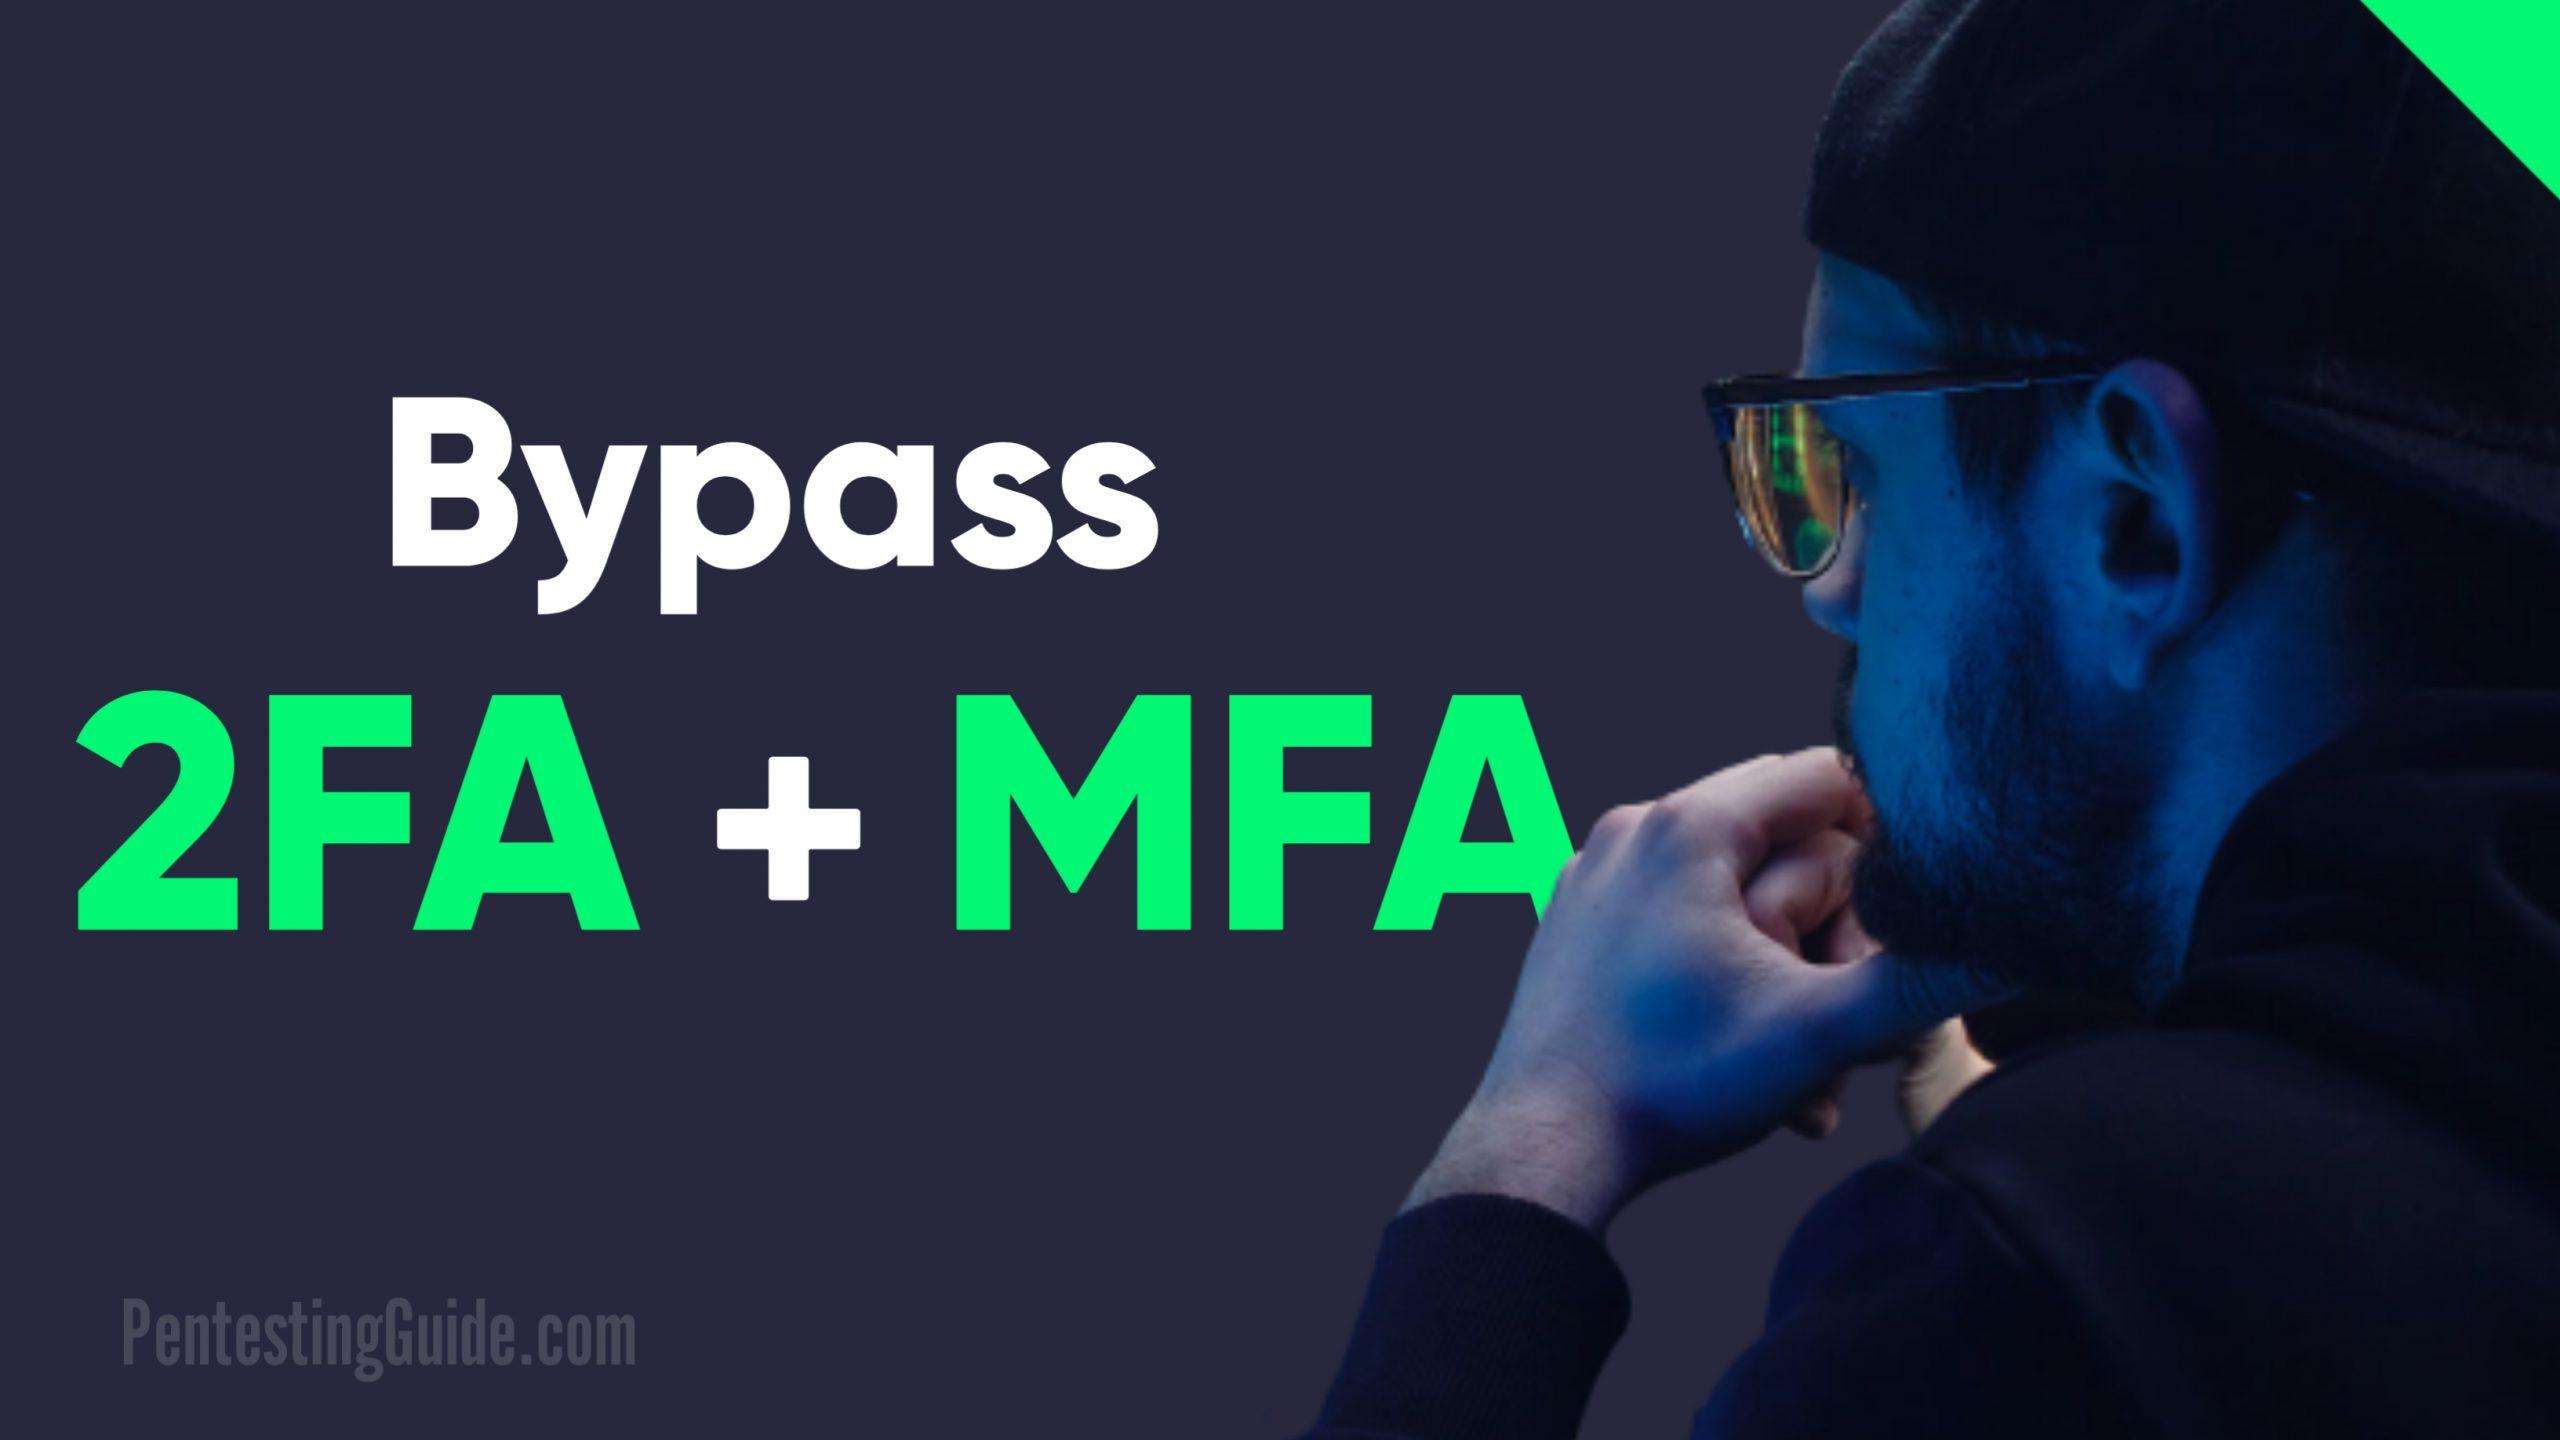 Hack Two Factor Authentication: How to Bypass 2FA and MFA